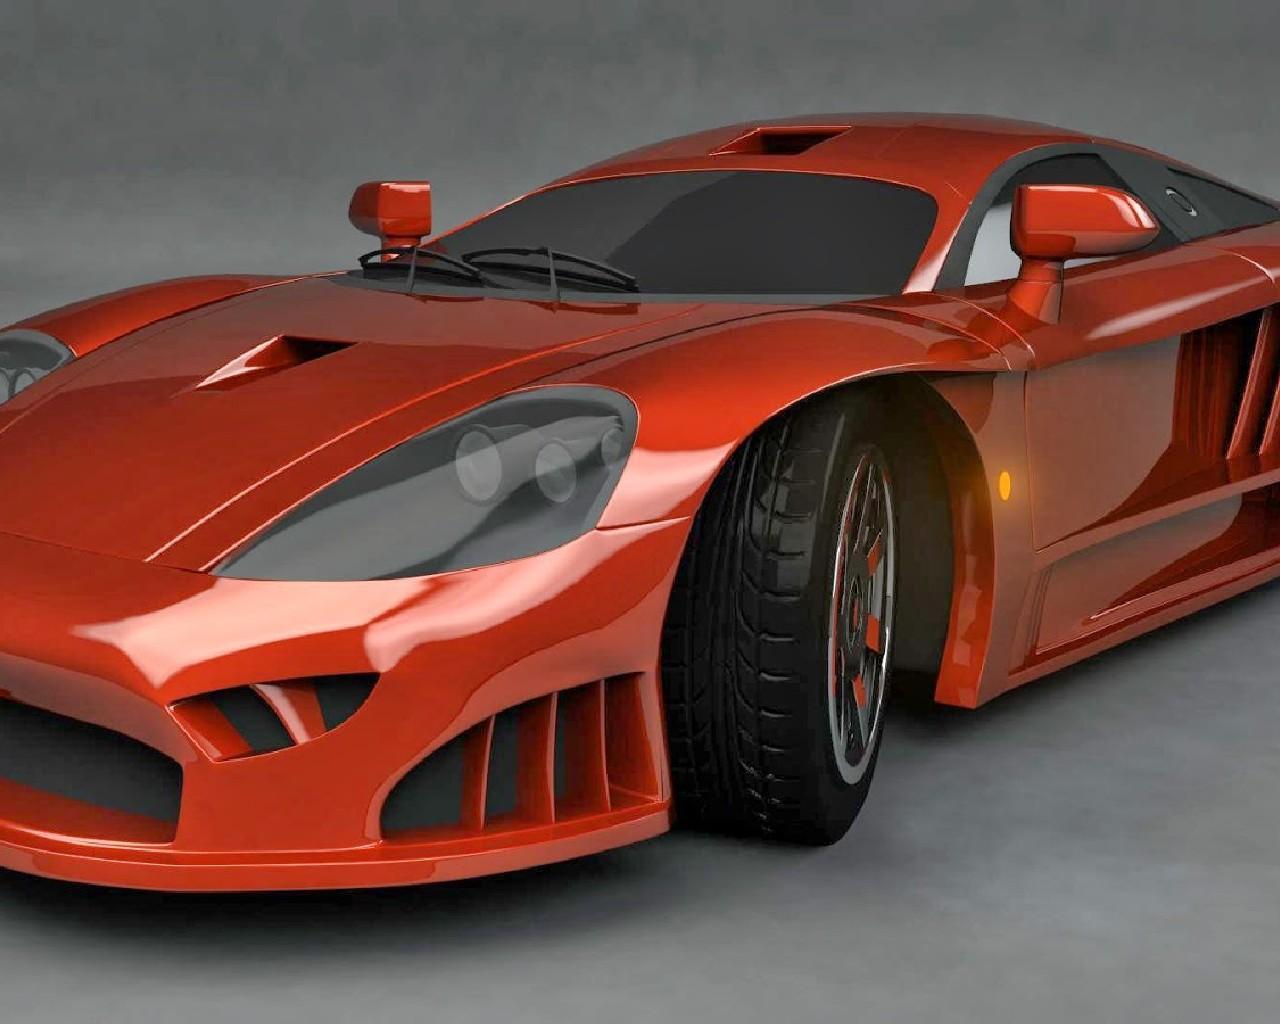 Wallpapers Saleen S7 Twin Turbo For Android Apk Download